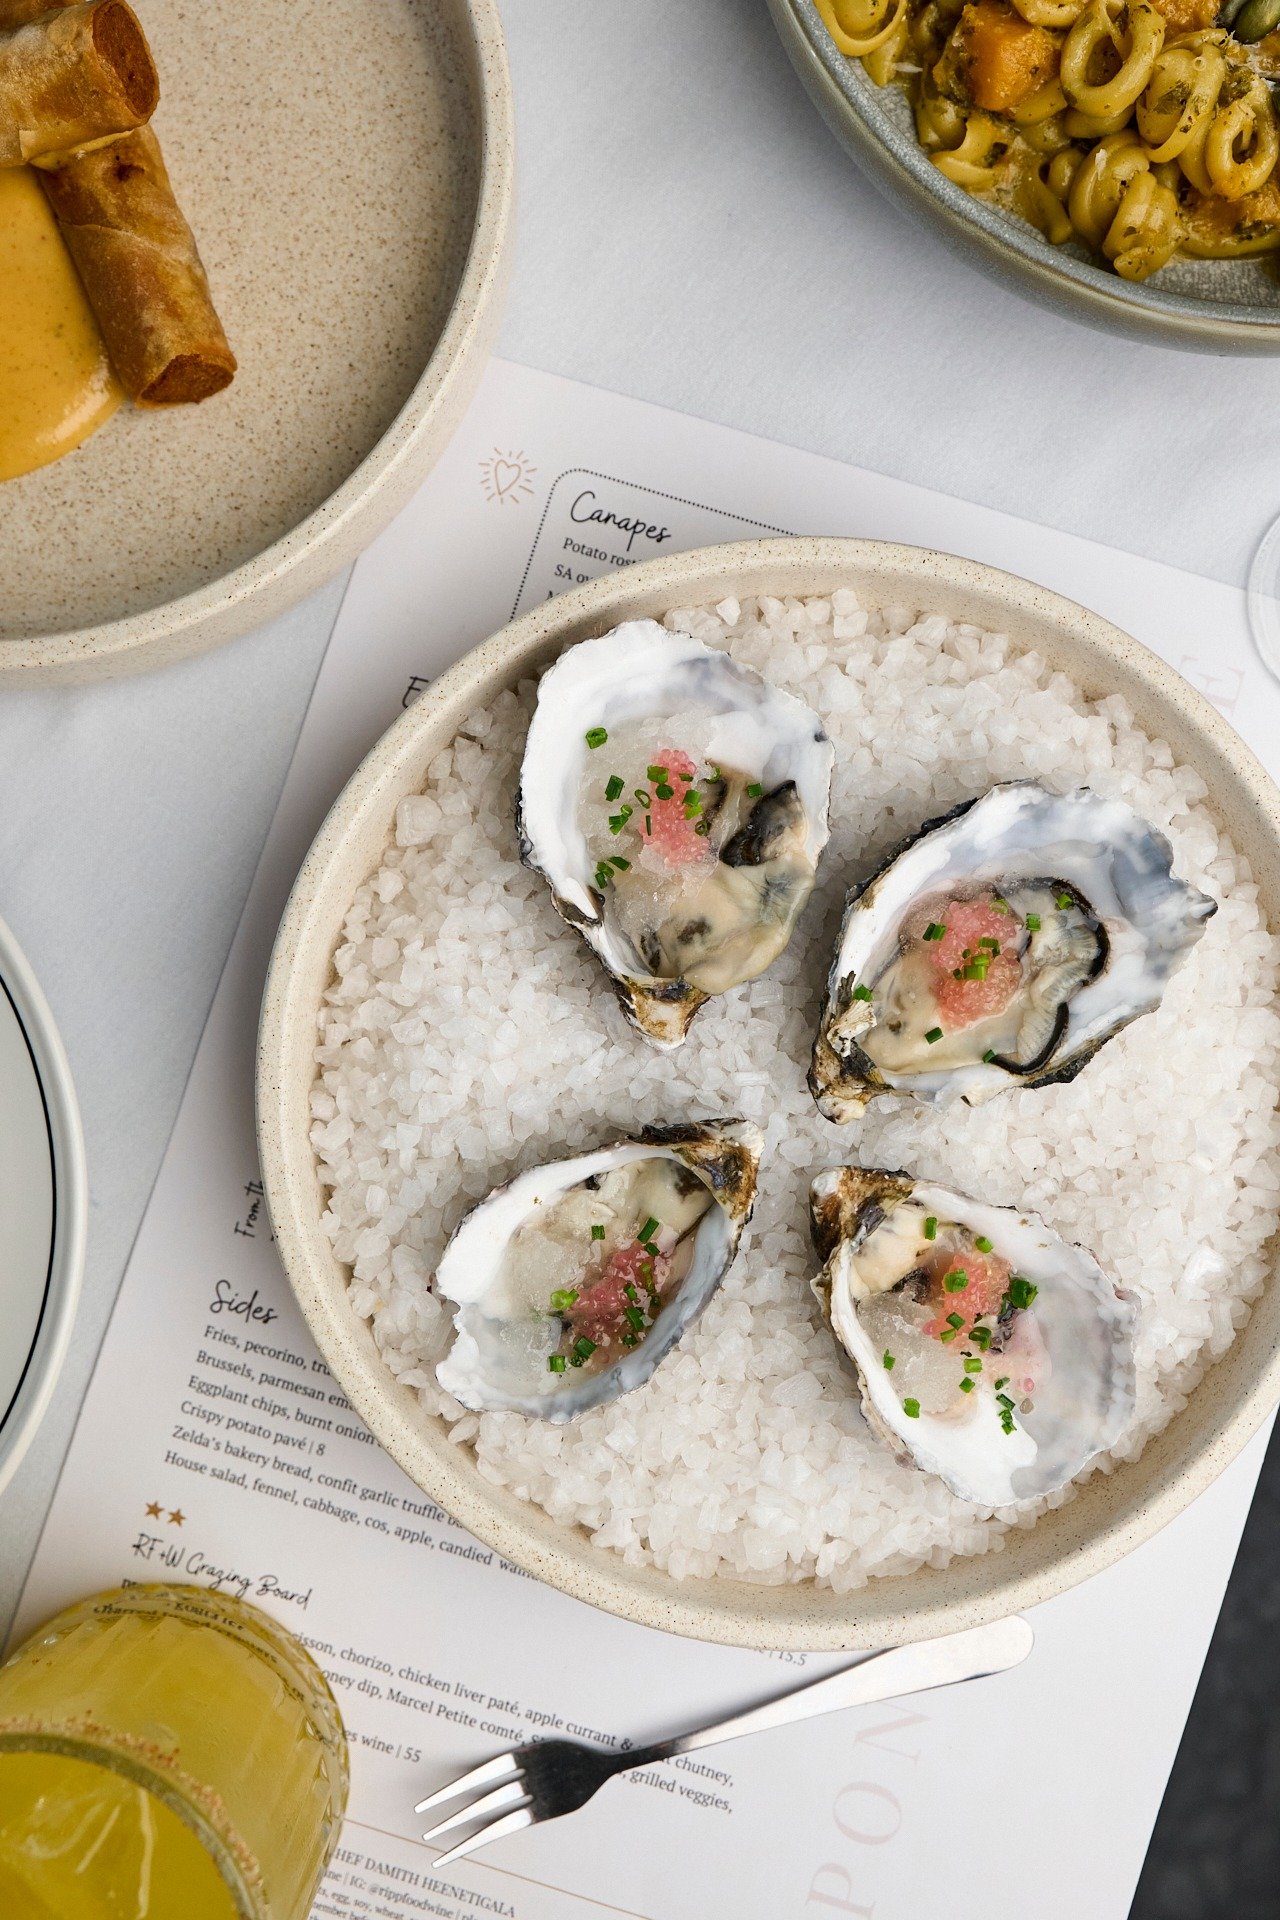 LUNCH IN RIPPONLEA EVERY FRIDAY &amp; SATURDAY

We are now open for Lunch every Friday &amp; Saturday from 12 - 3pm.
 
Start with Oysters with limoncello granita and why not add on free flowing
 French bubbles
 (2hrs - $35p/p)